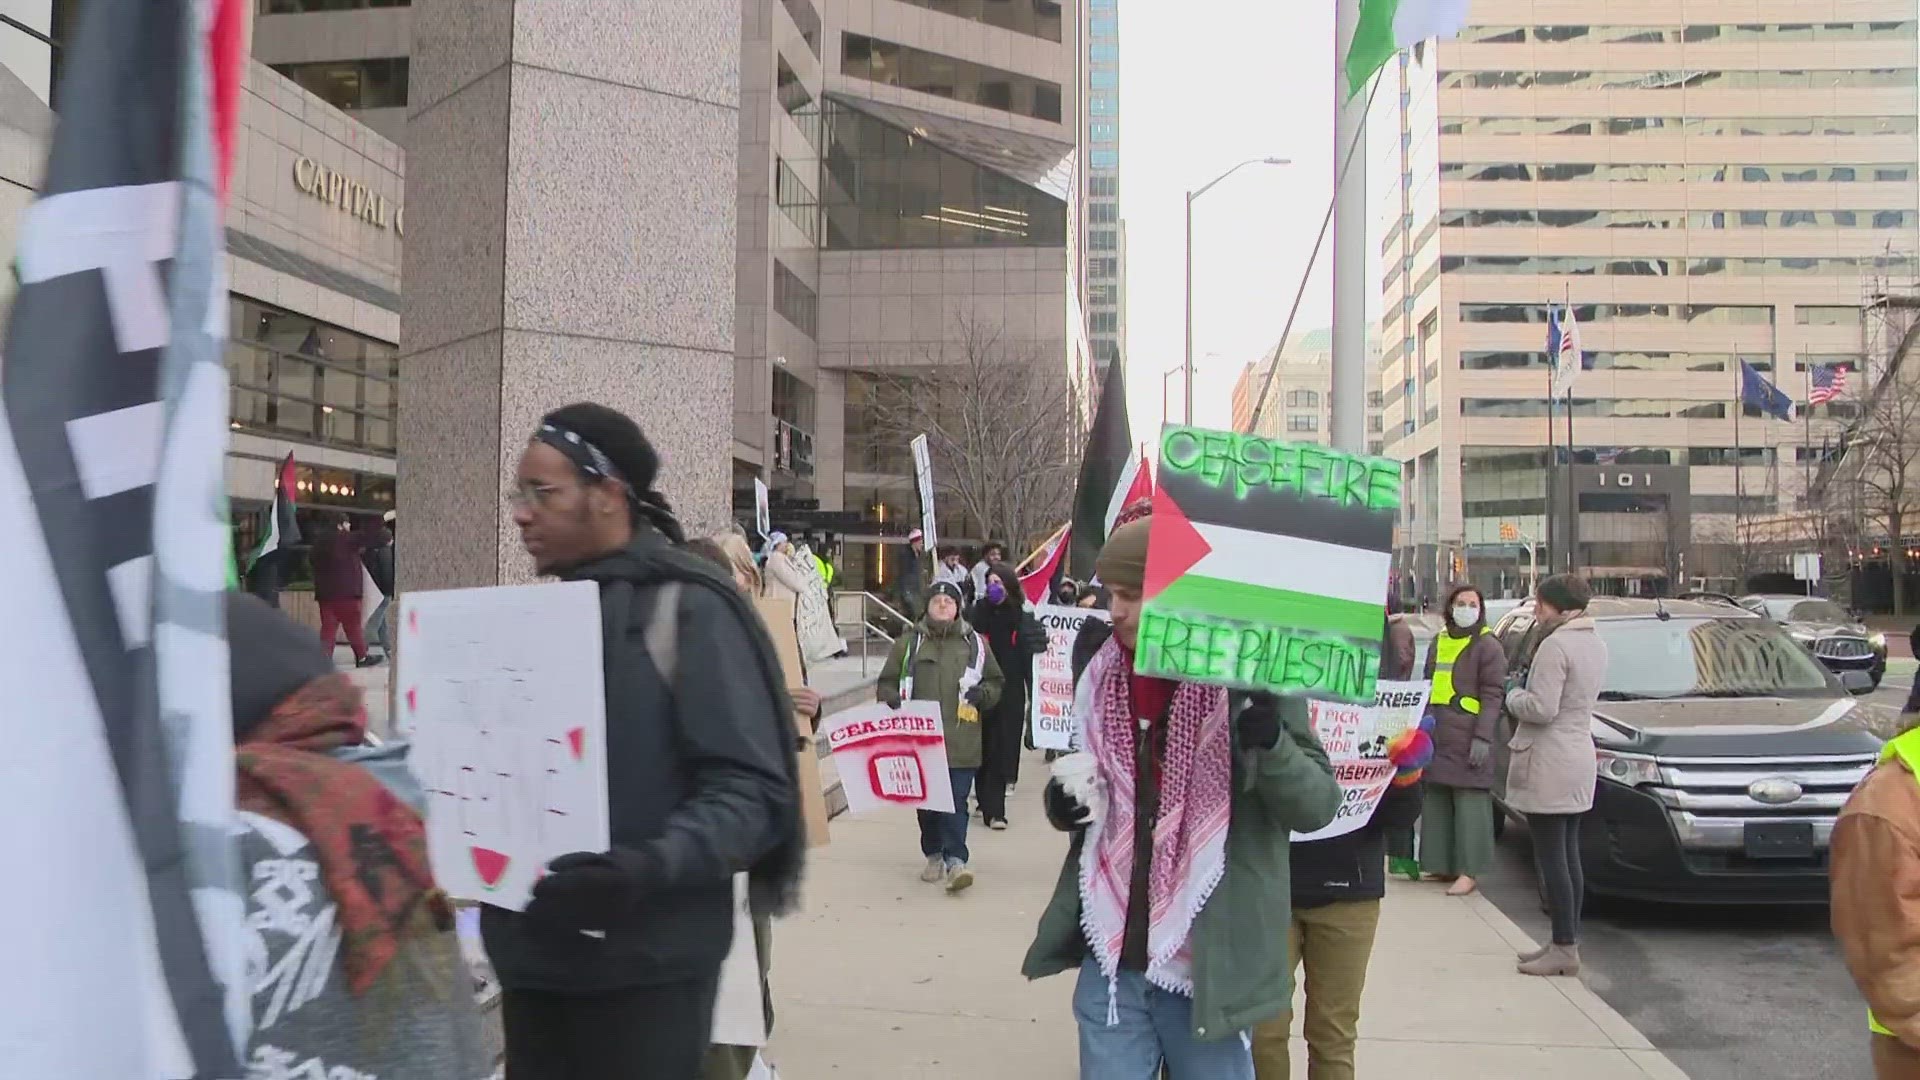 Indy's "Jewish Voice for Peace" marched to Senator Todd Young's office today... demanding a ceasefire.